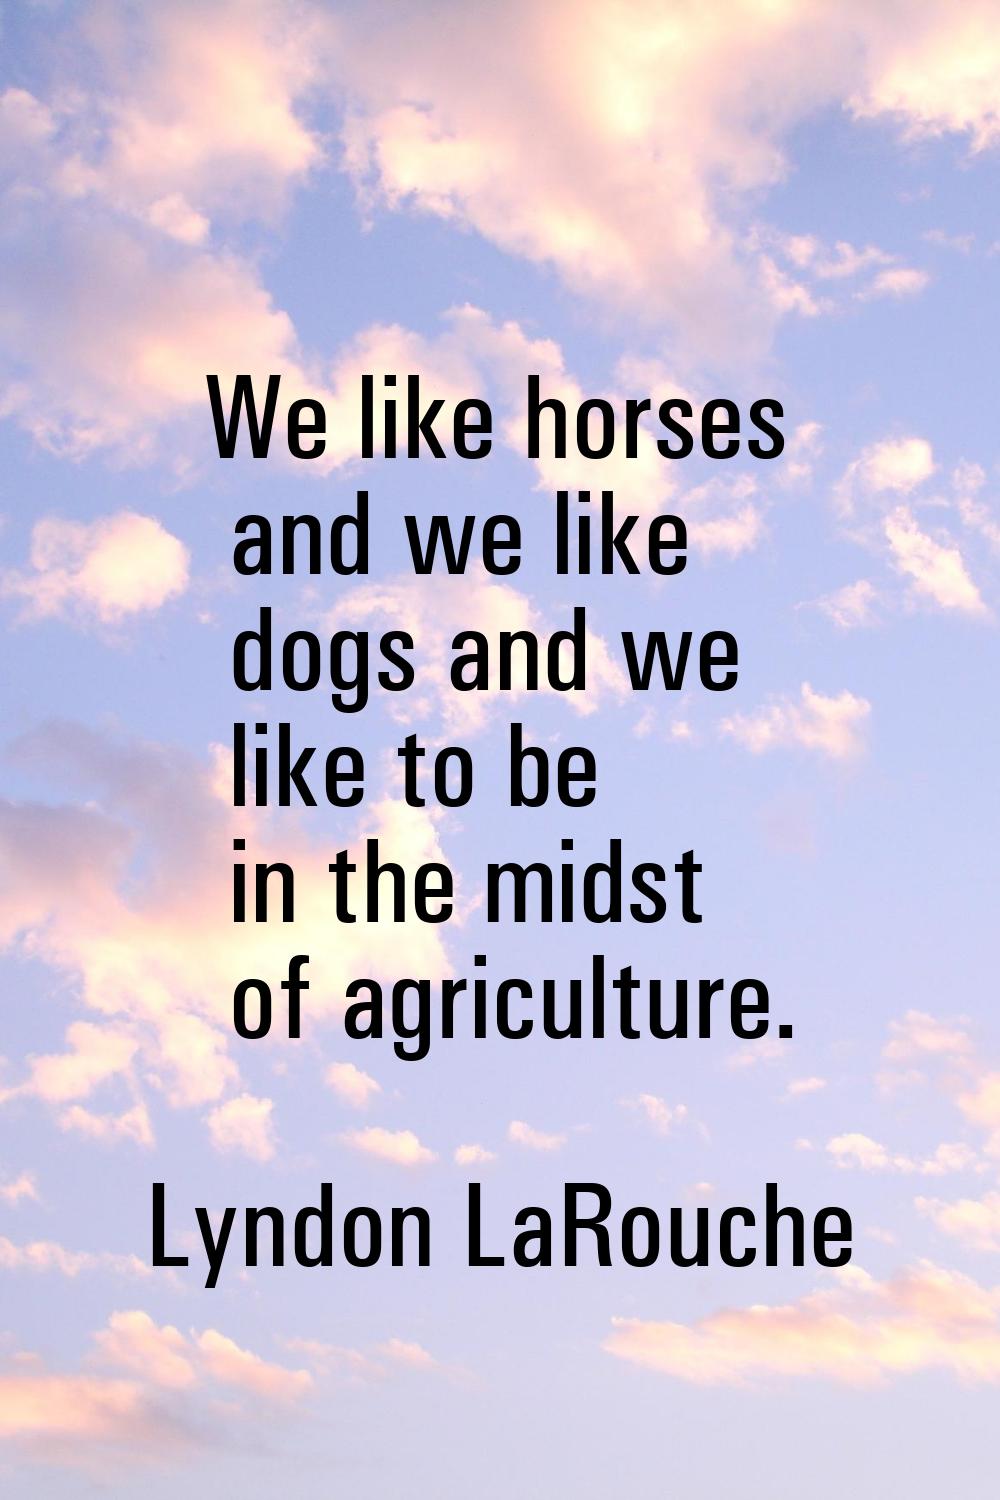 We like horses and we like dogs and we like to be in the midst of agriculture.